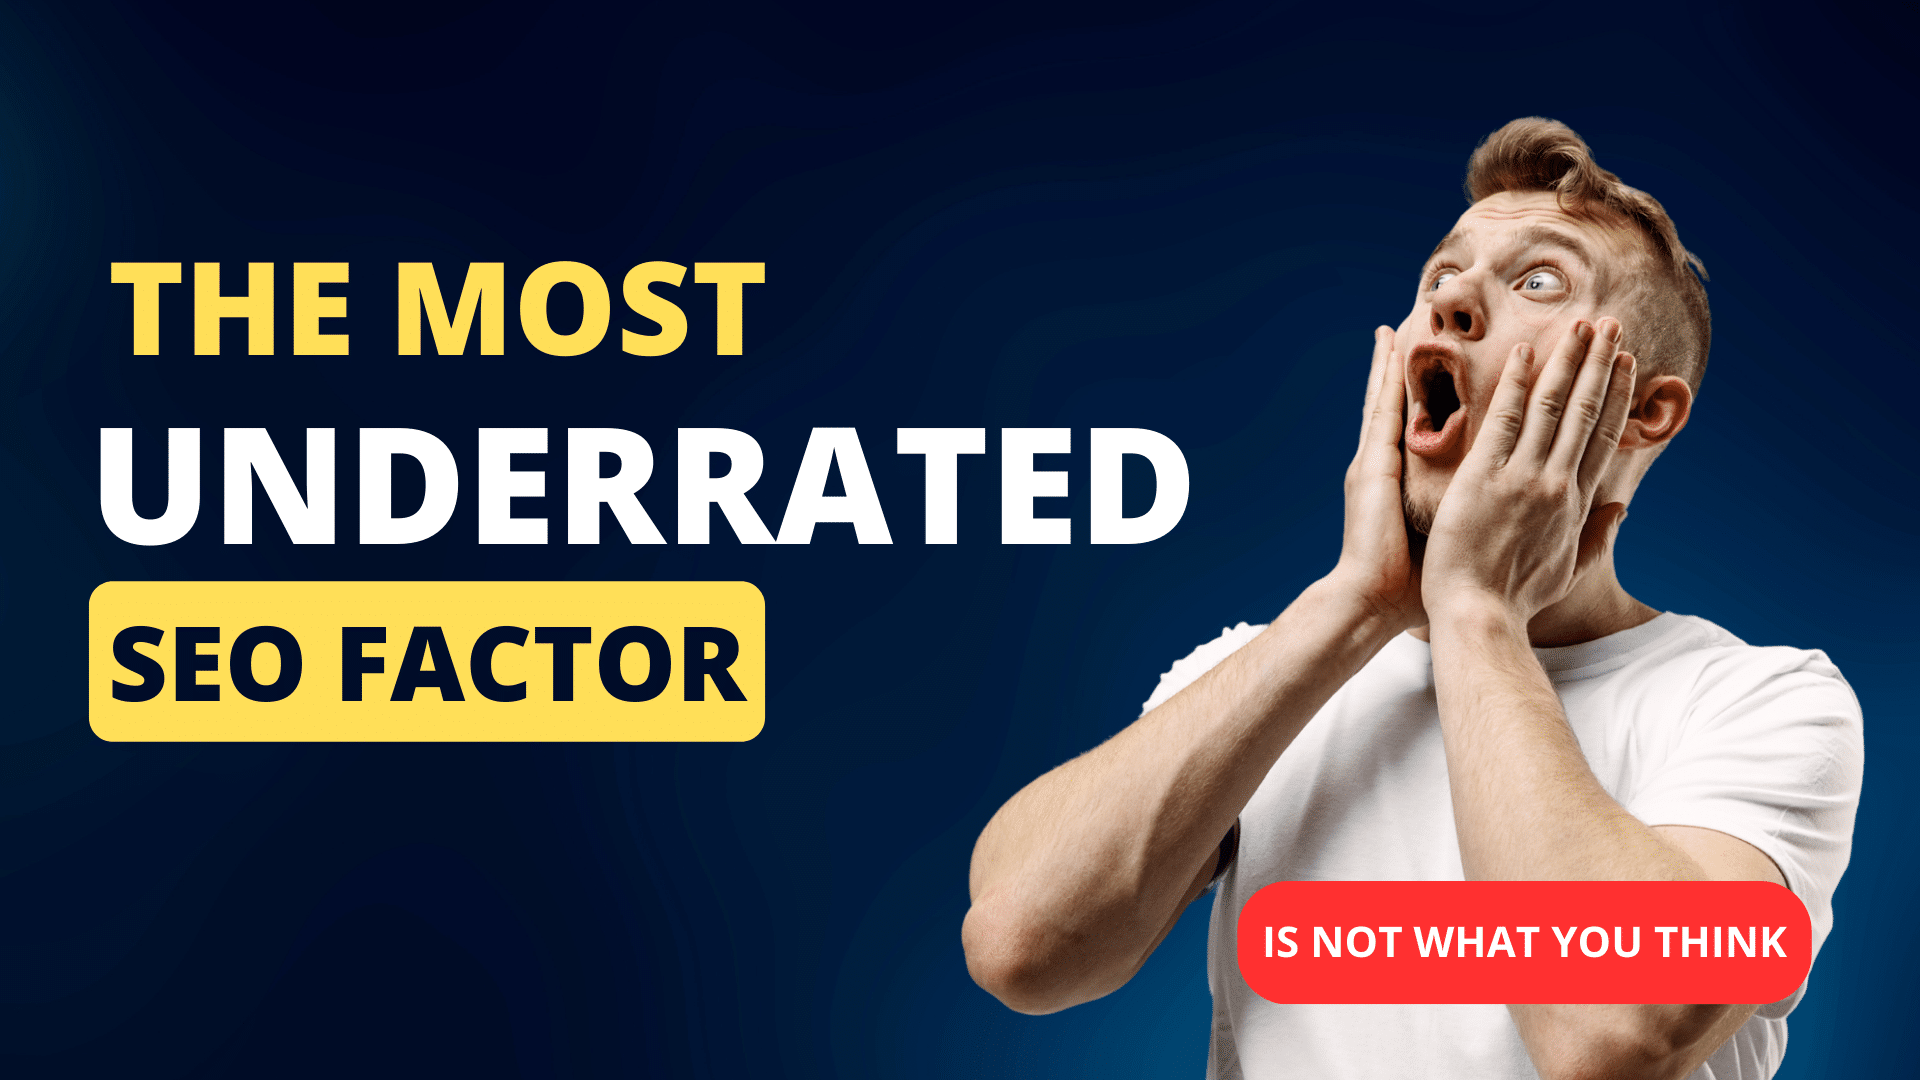 The most underrated SEO factor